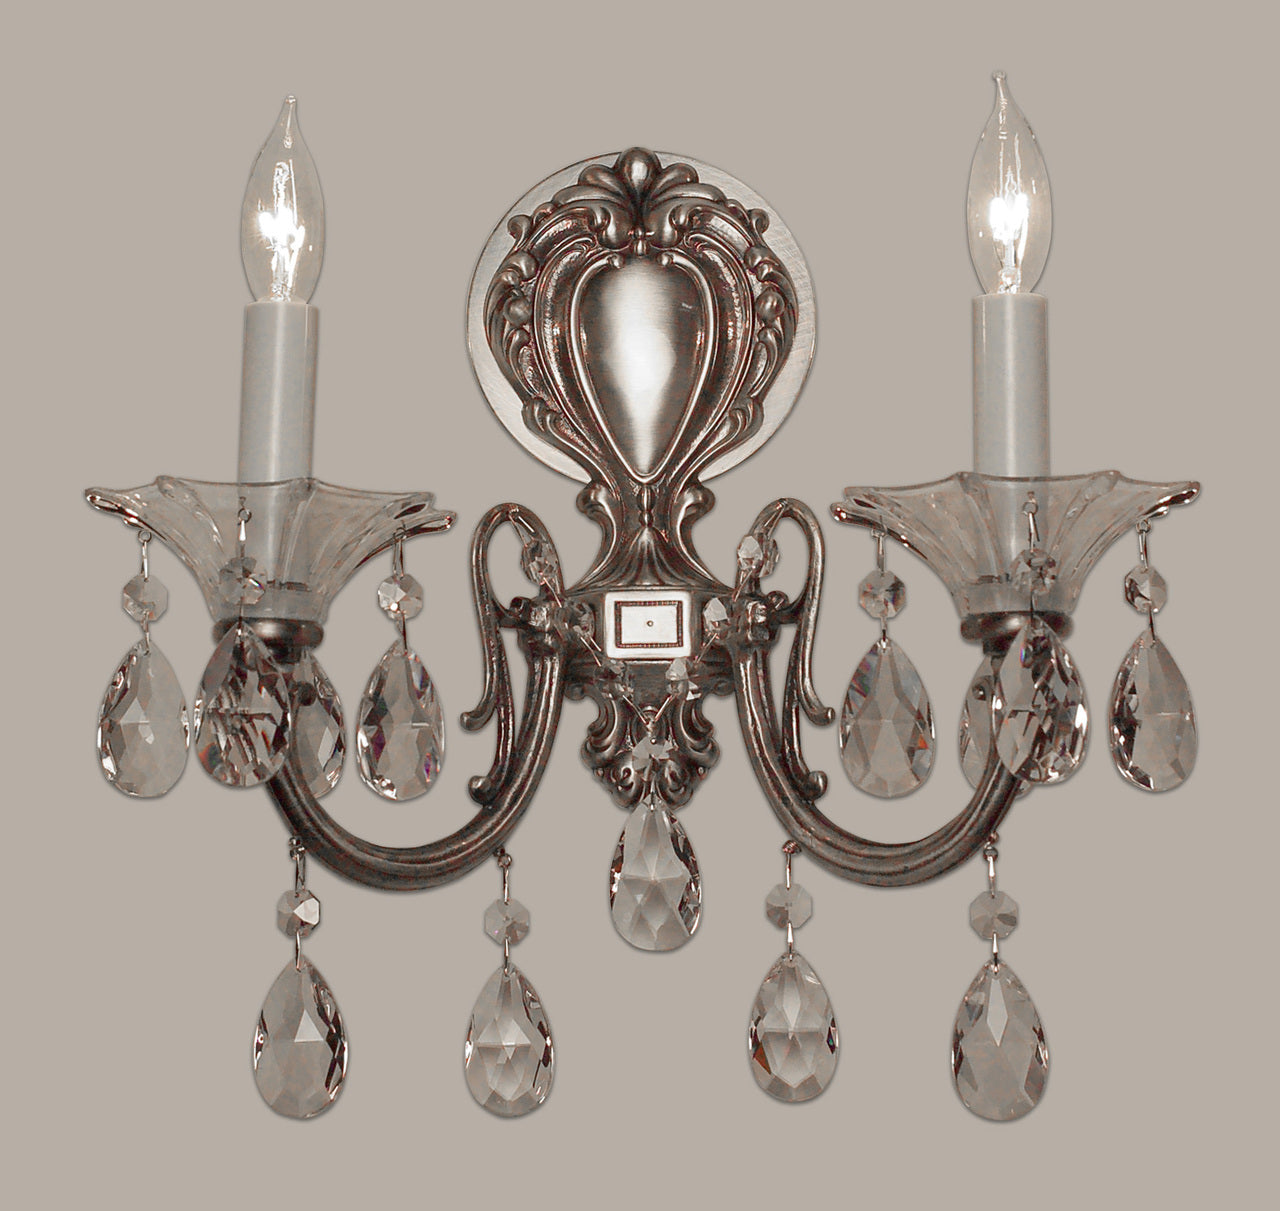 Classic Lighting 57052 MS SC Via Lombardi Crystal Wall Sconce in Millennium Silver (Imported from Spain)